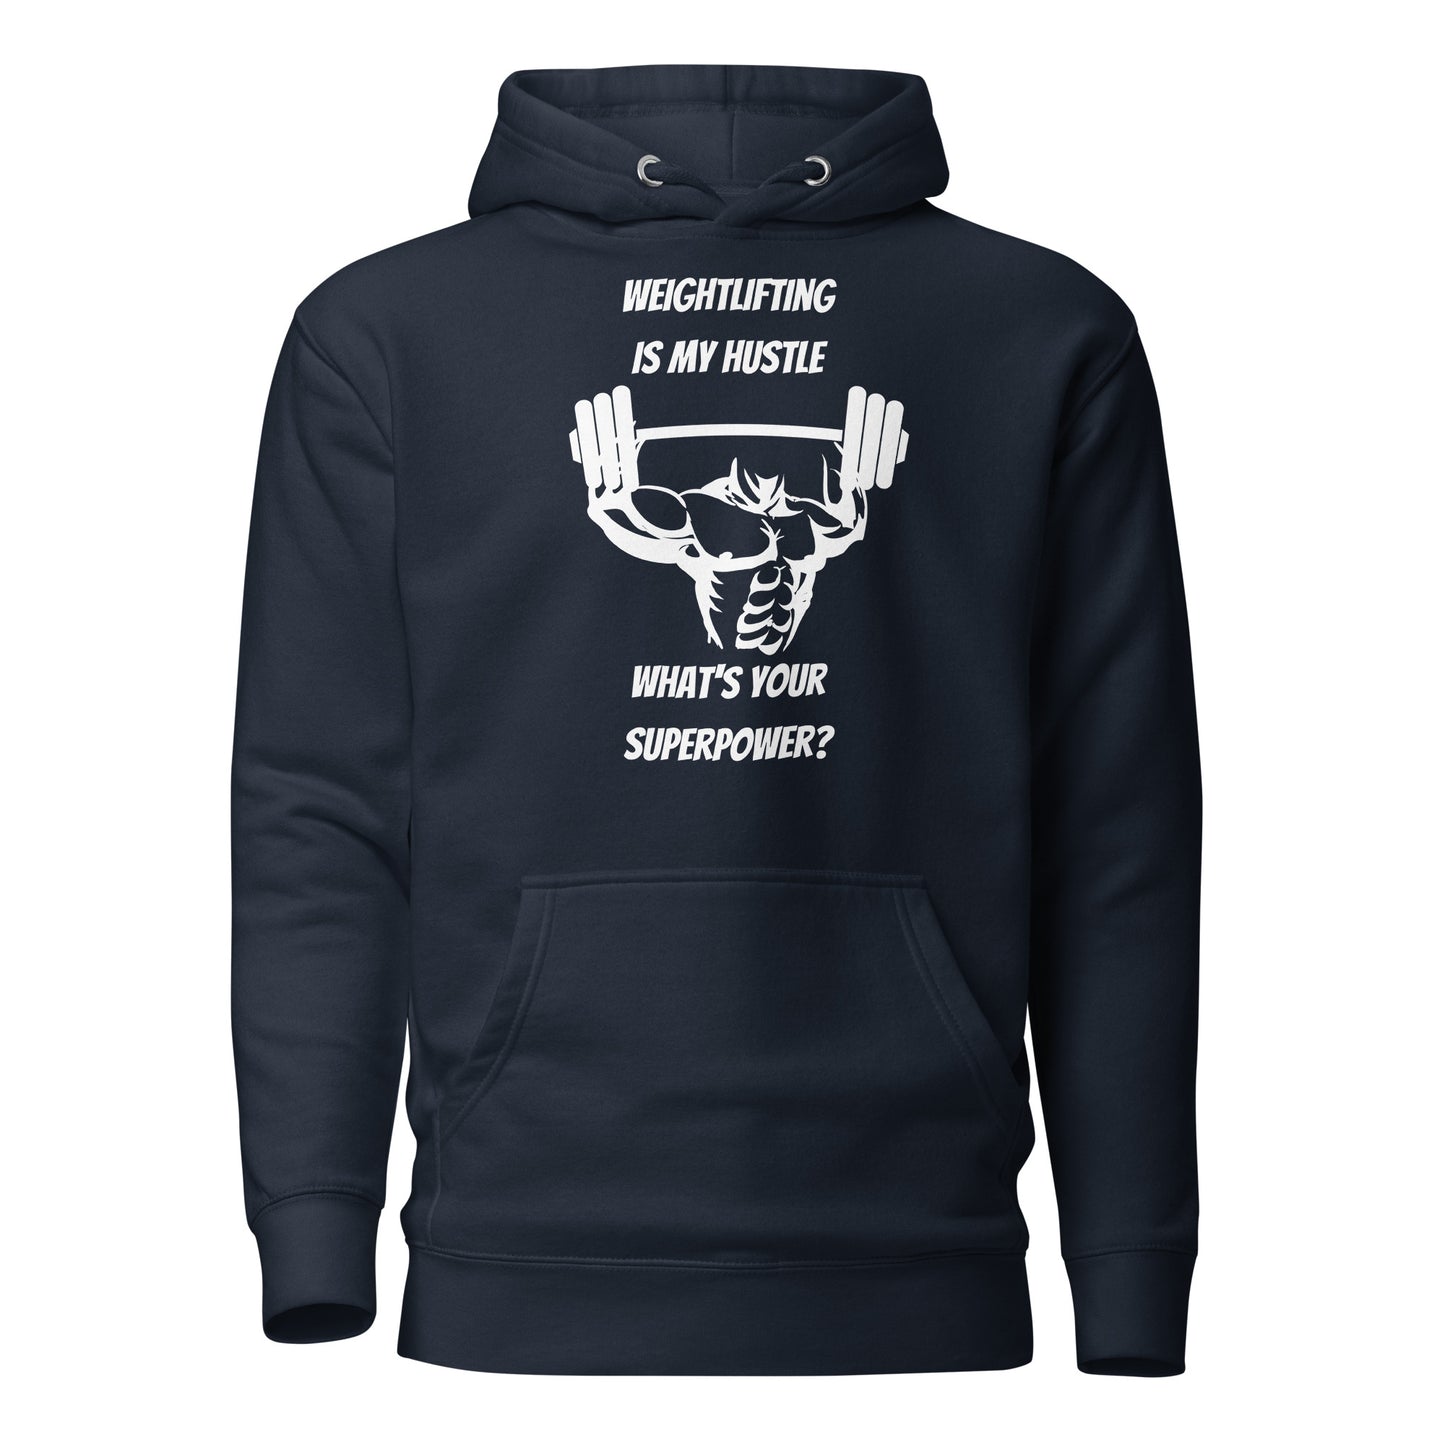 Weightlifting Is My Hustle What's Your Superpower? Unisex Hoodie